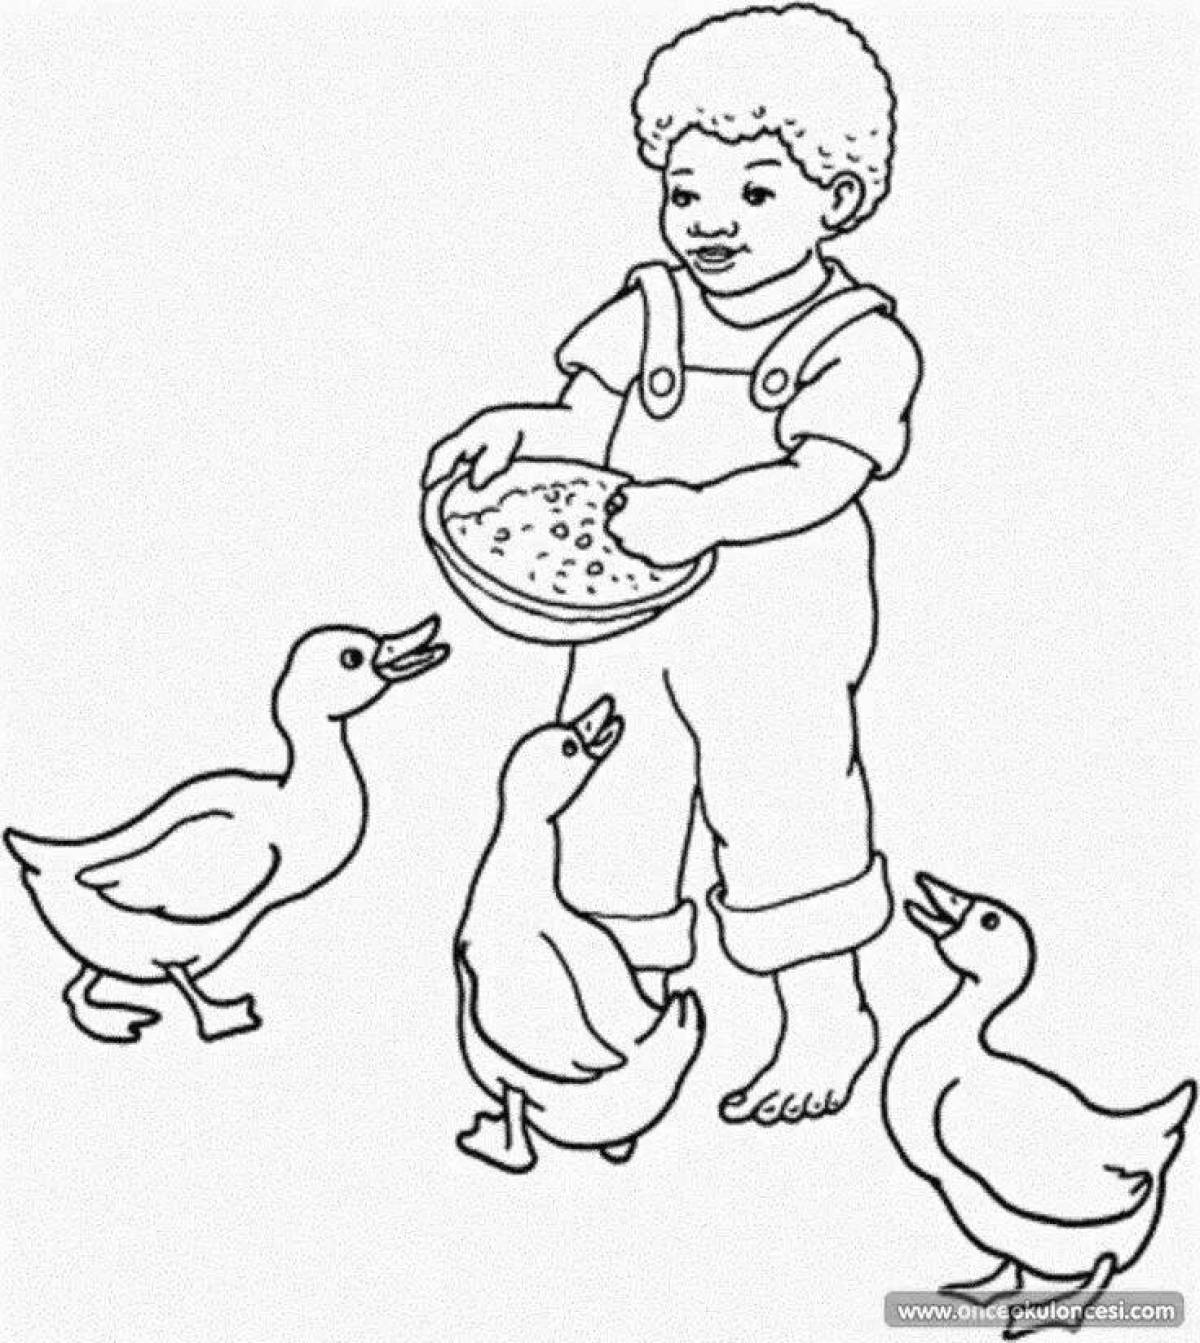 Cute good deeds coloring page